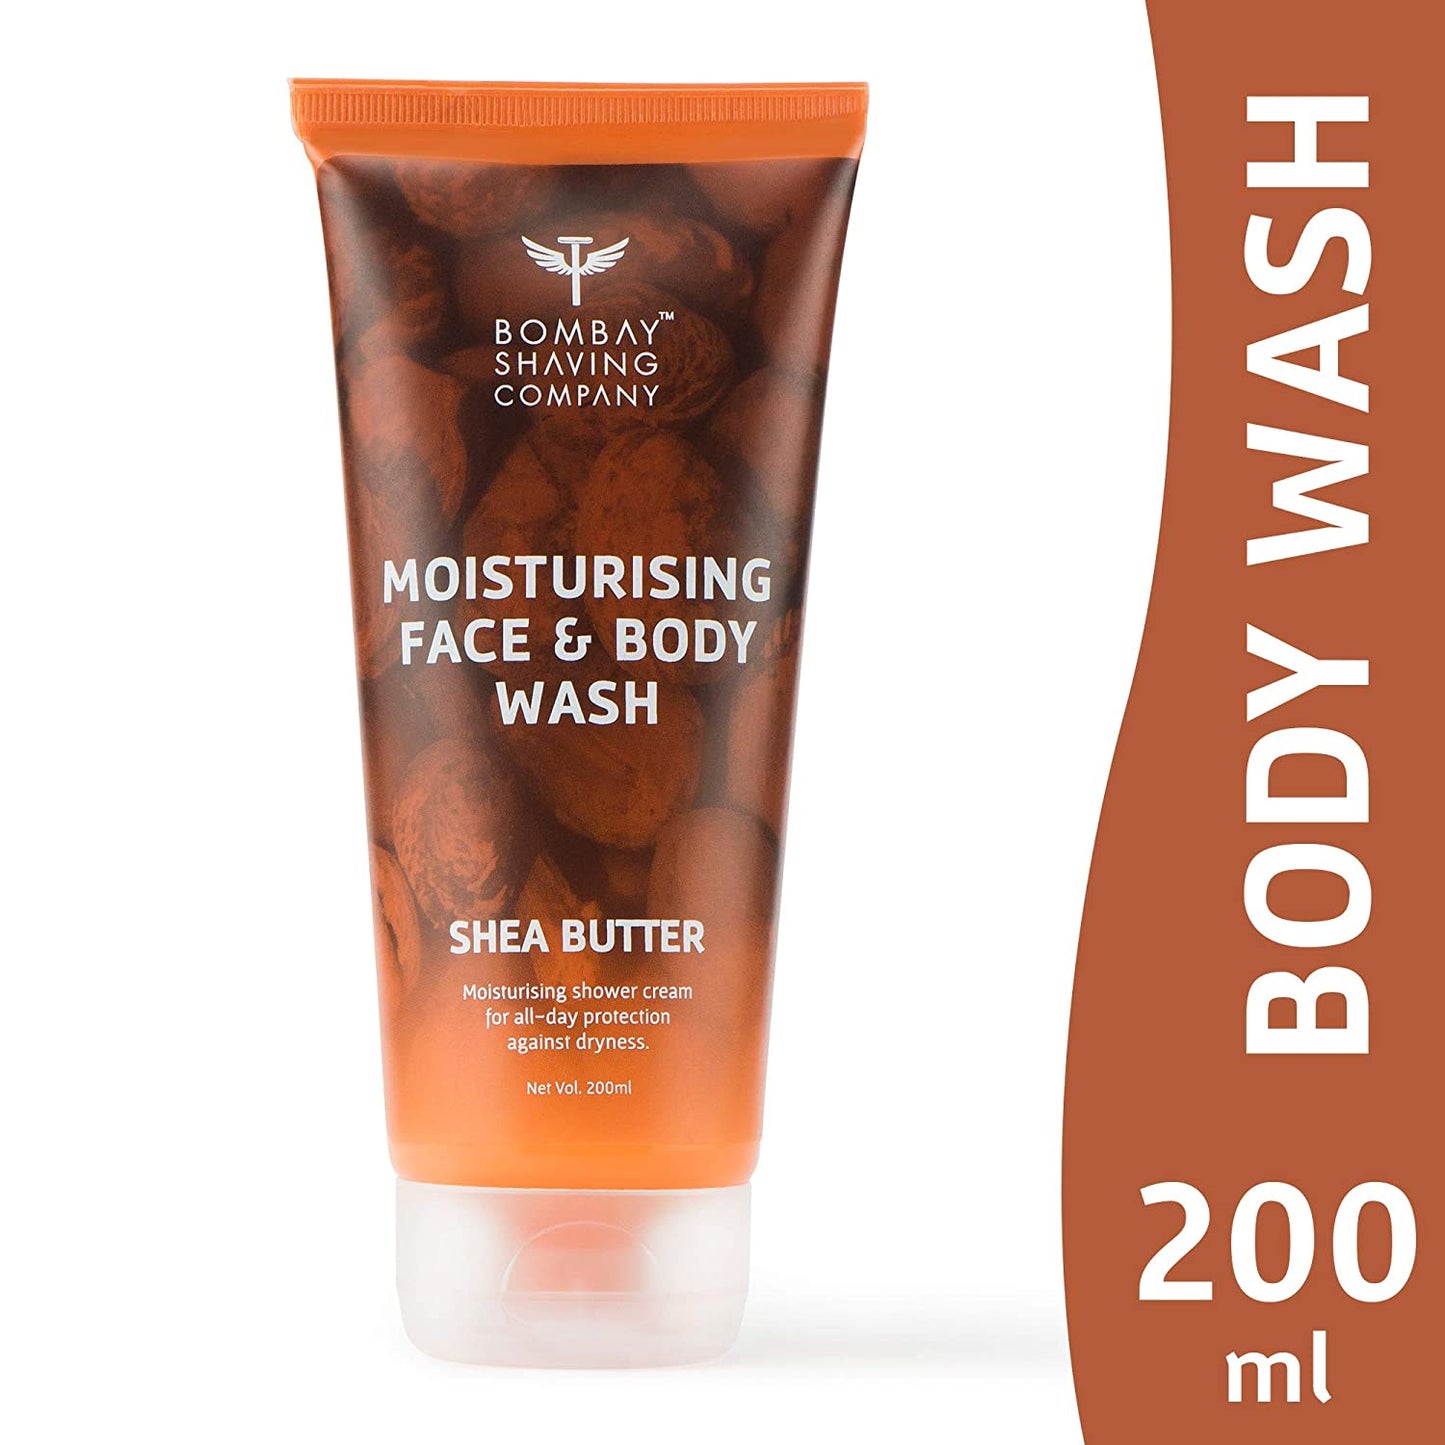 Bombay Shaving Company Moisturising Face & Body Wash with Shea Butter - 200 ml (Expiring August 2024)